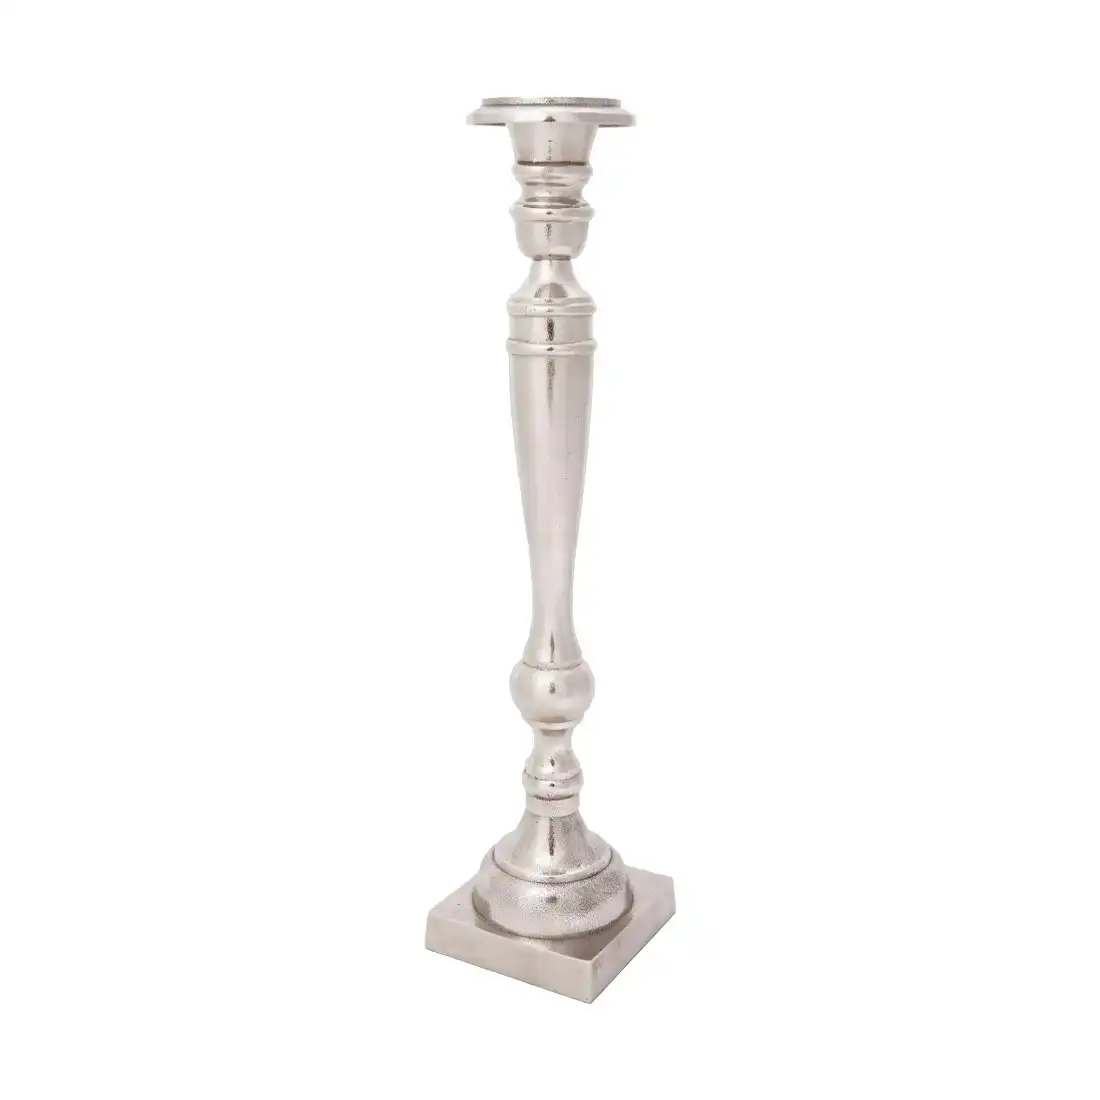 SSH Collection Athena 58cm Single Candle Stand - Antique Nickel Finish